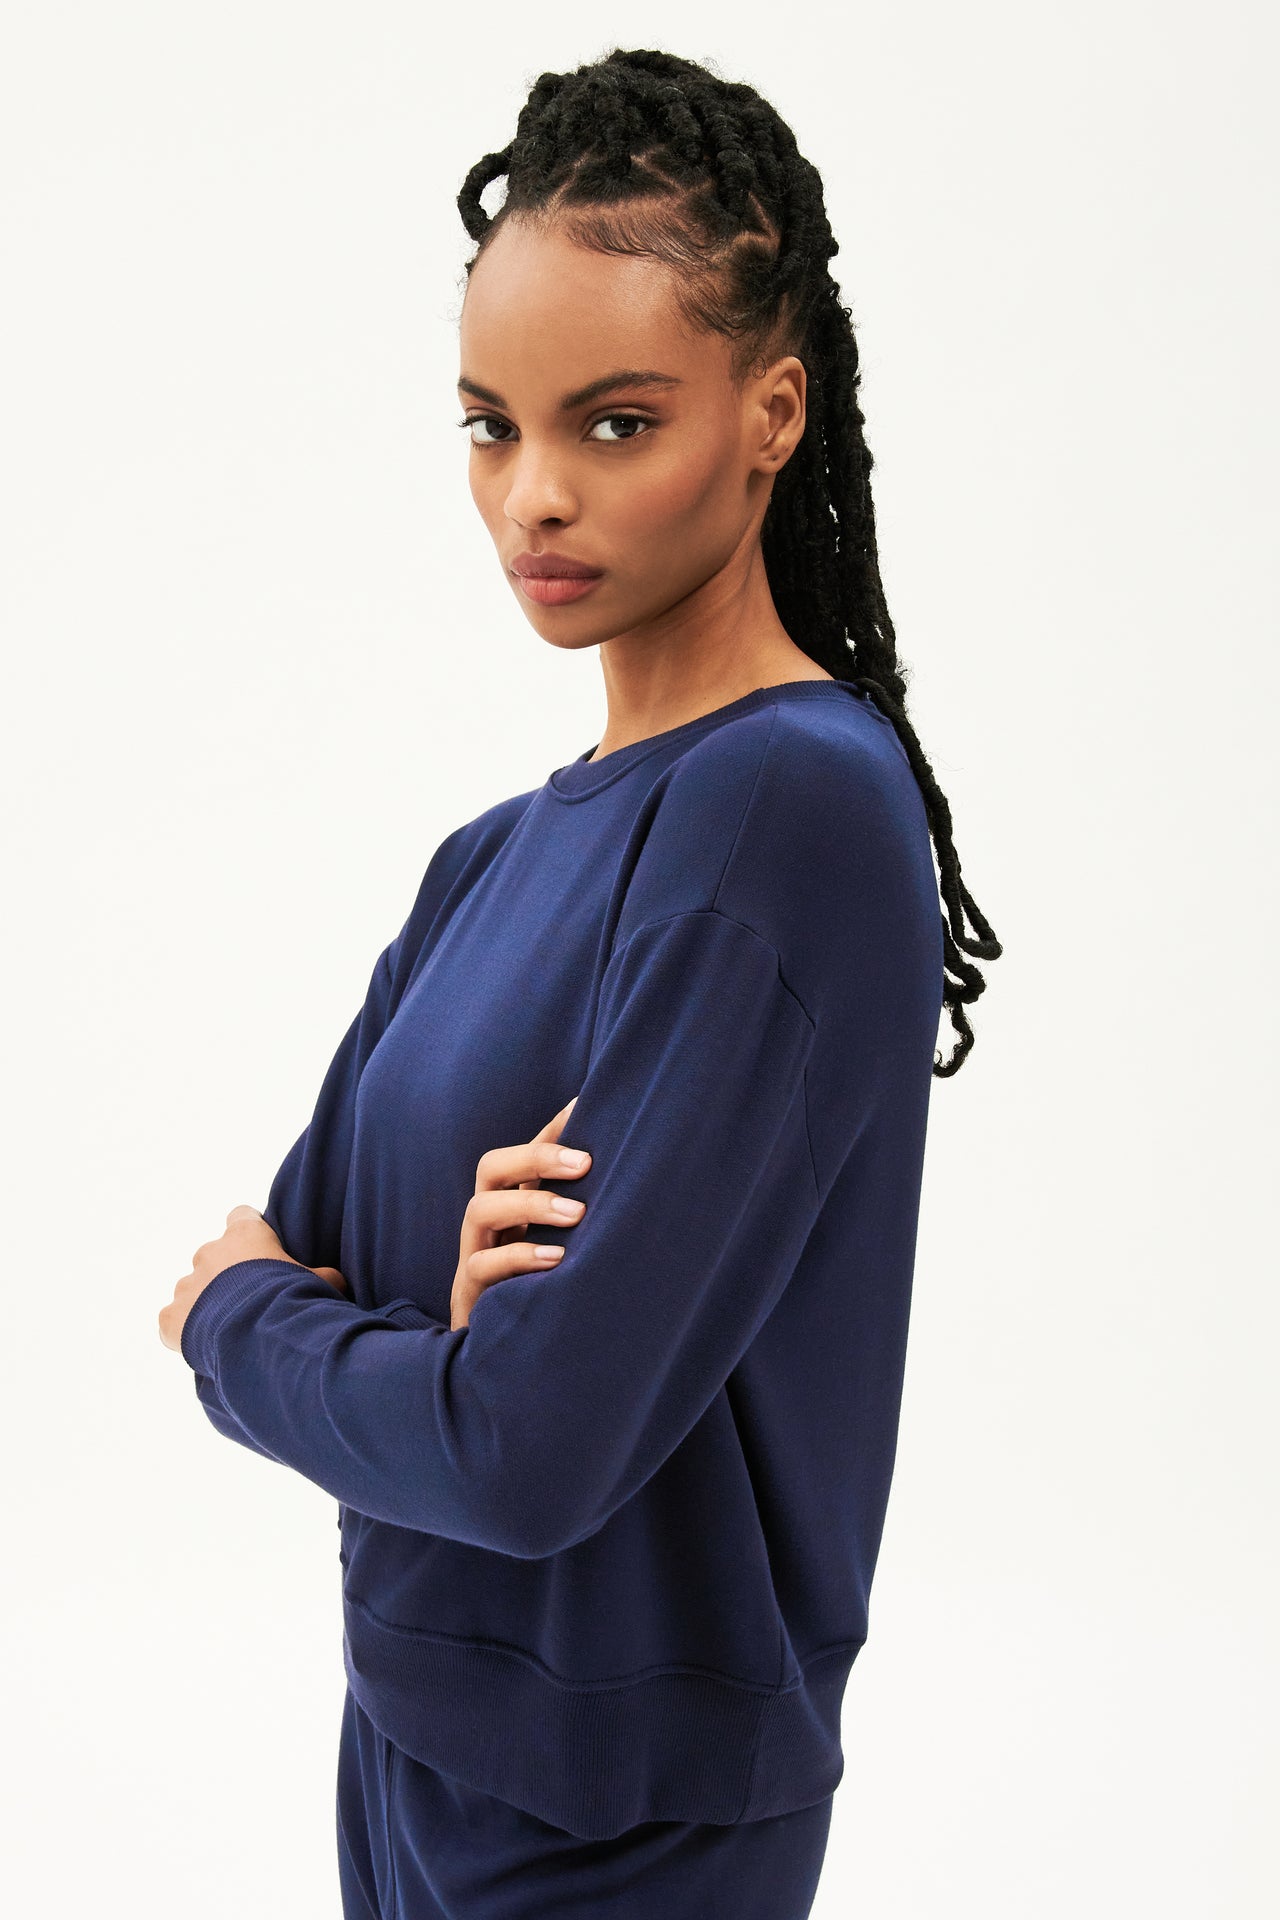 Front side view of woman with black braids wearing a dark blue crewneck sweatshirt  with dark blue joggers